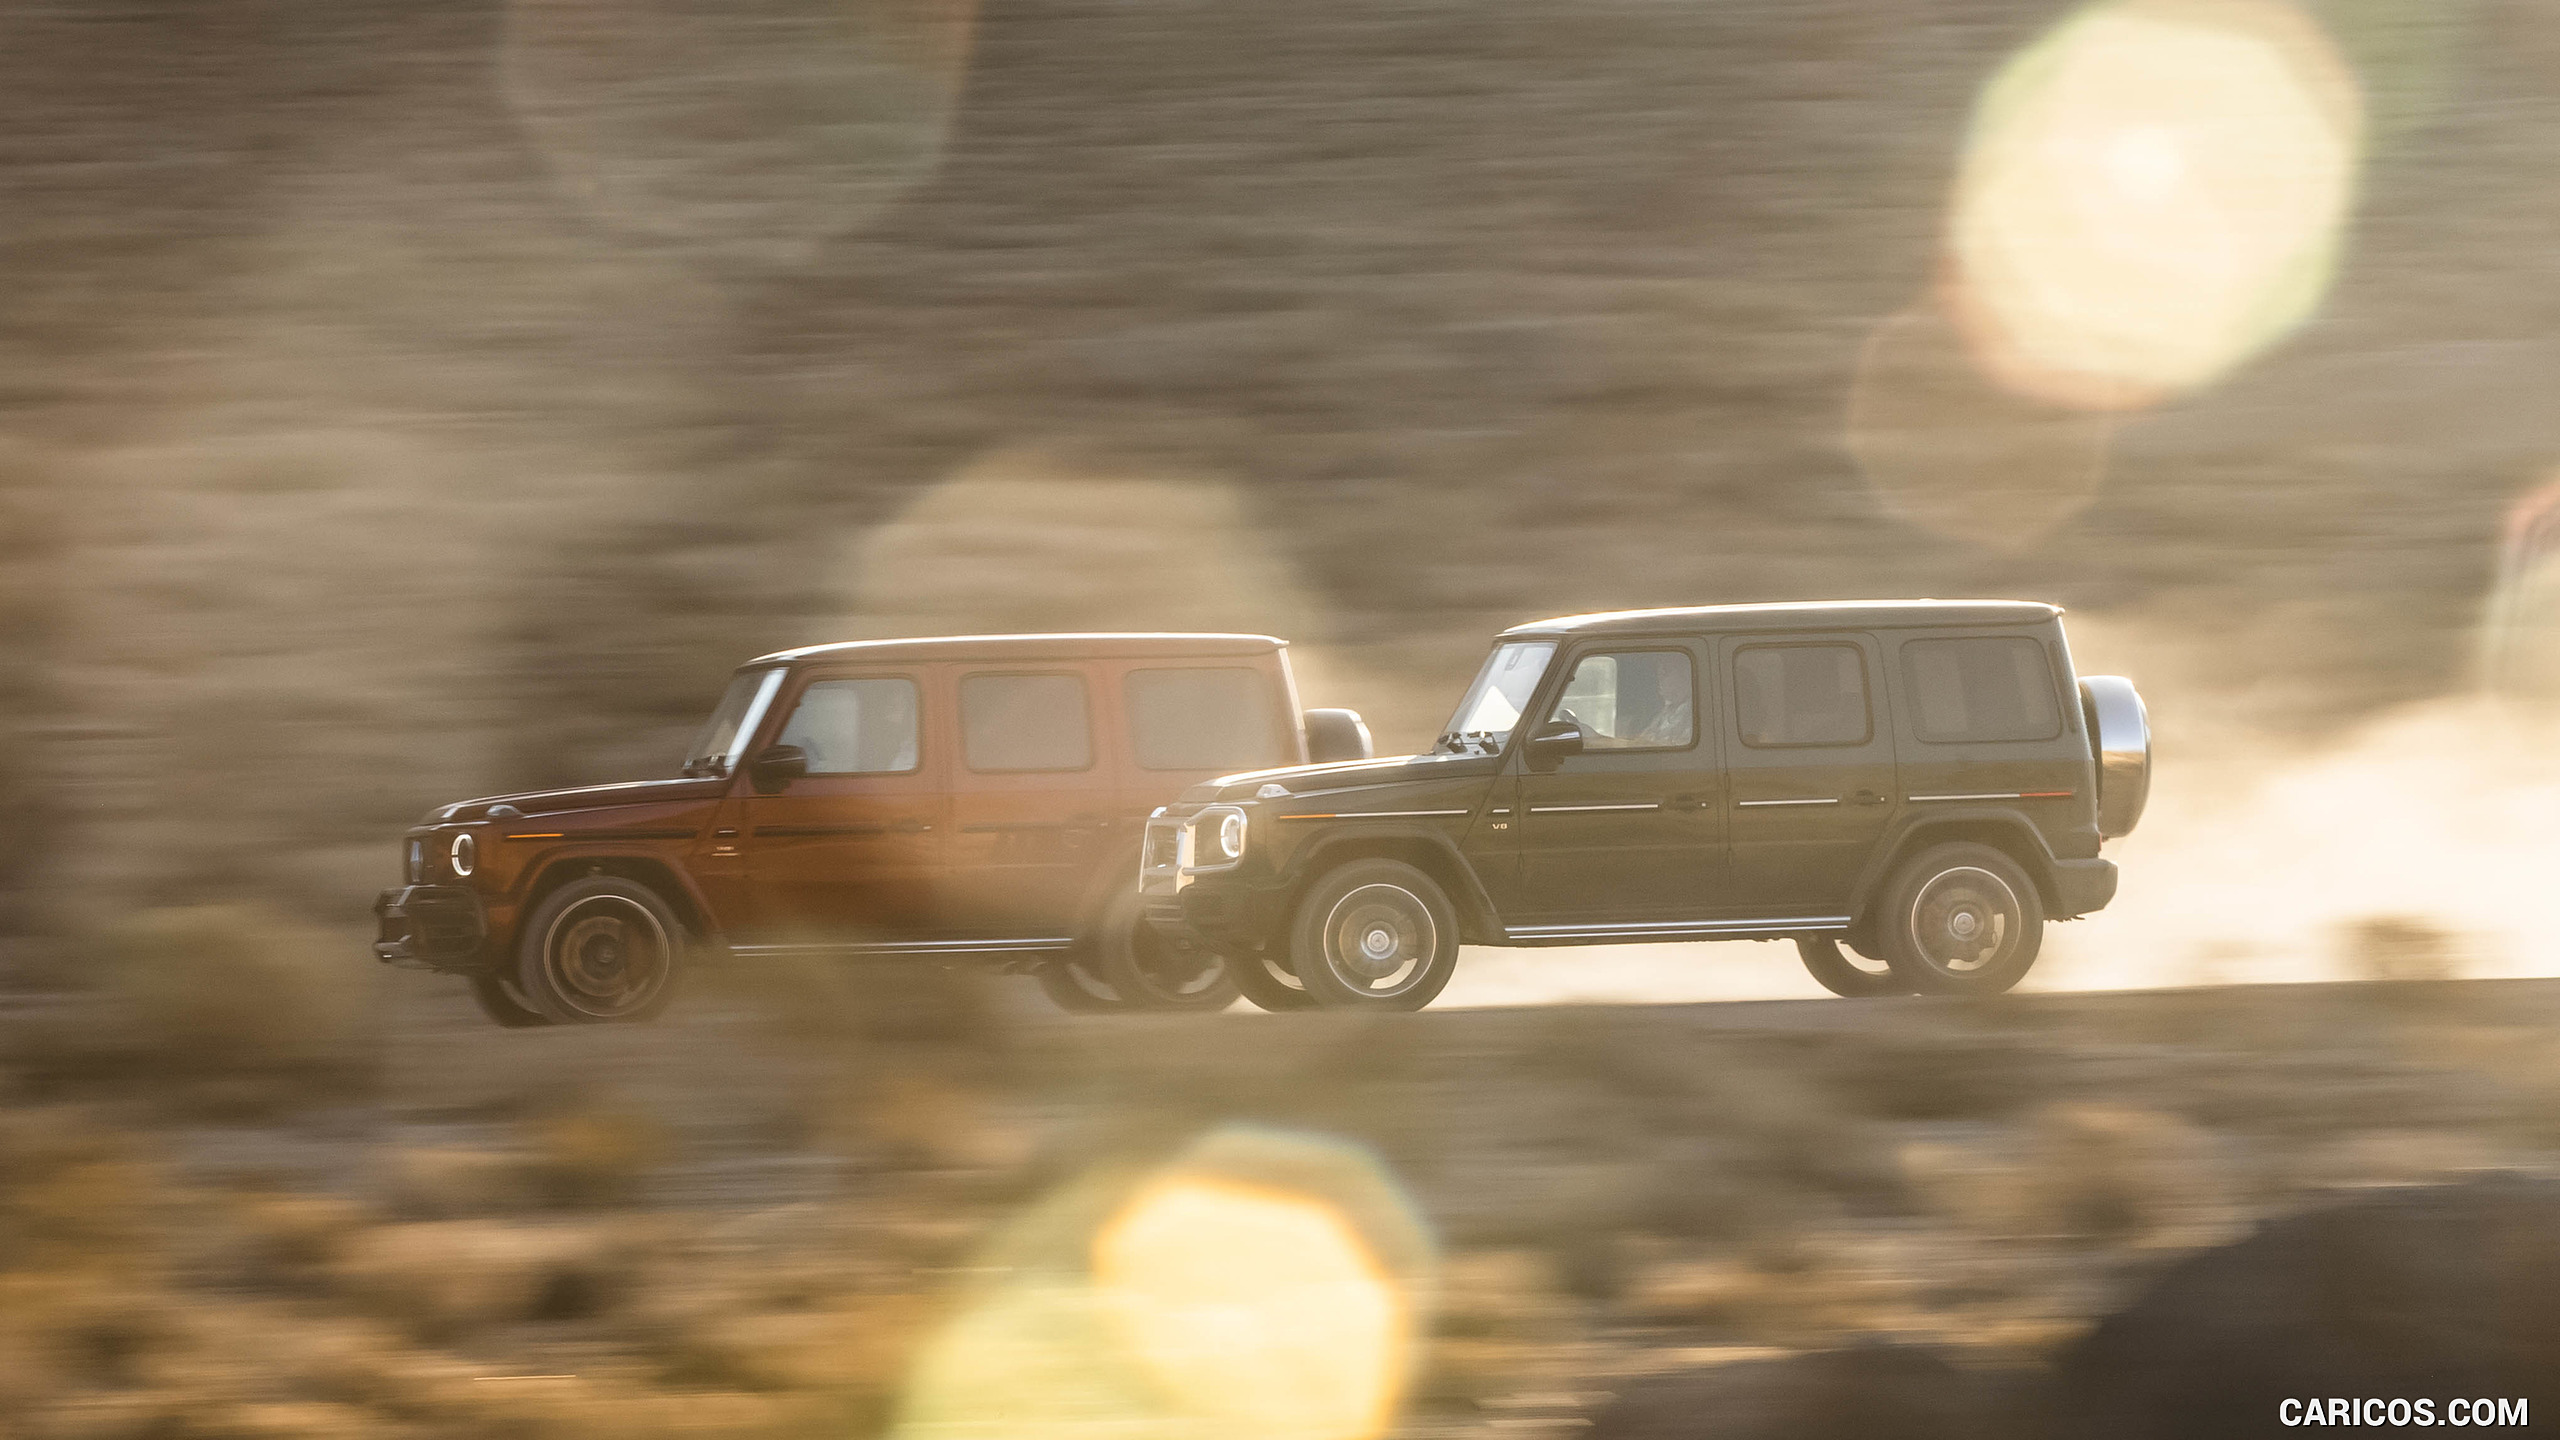 2019 Mercedes-AMG G63 (U.S.-Spec) and 2019 G550, #361 of 452